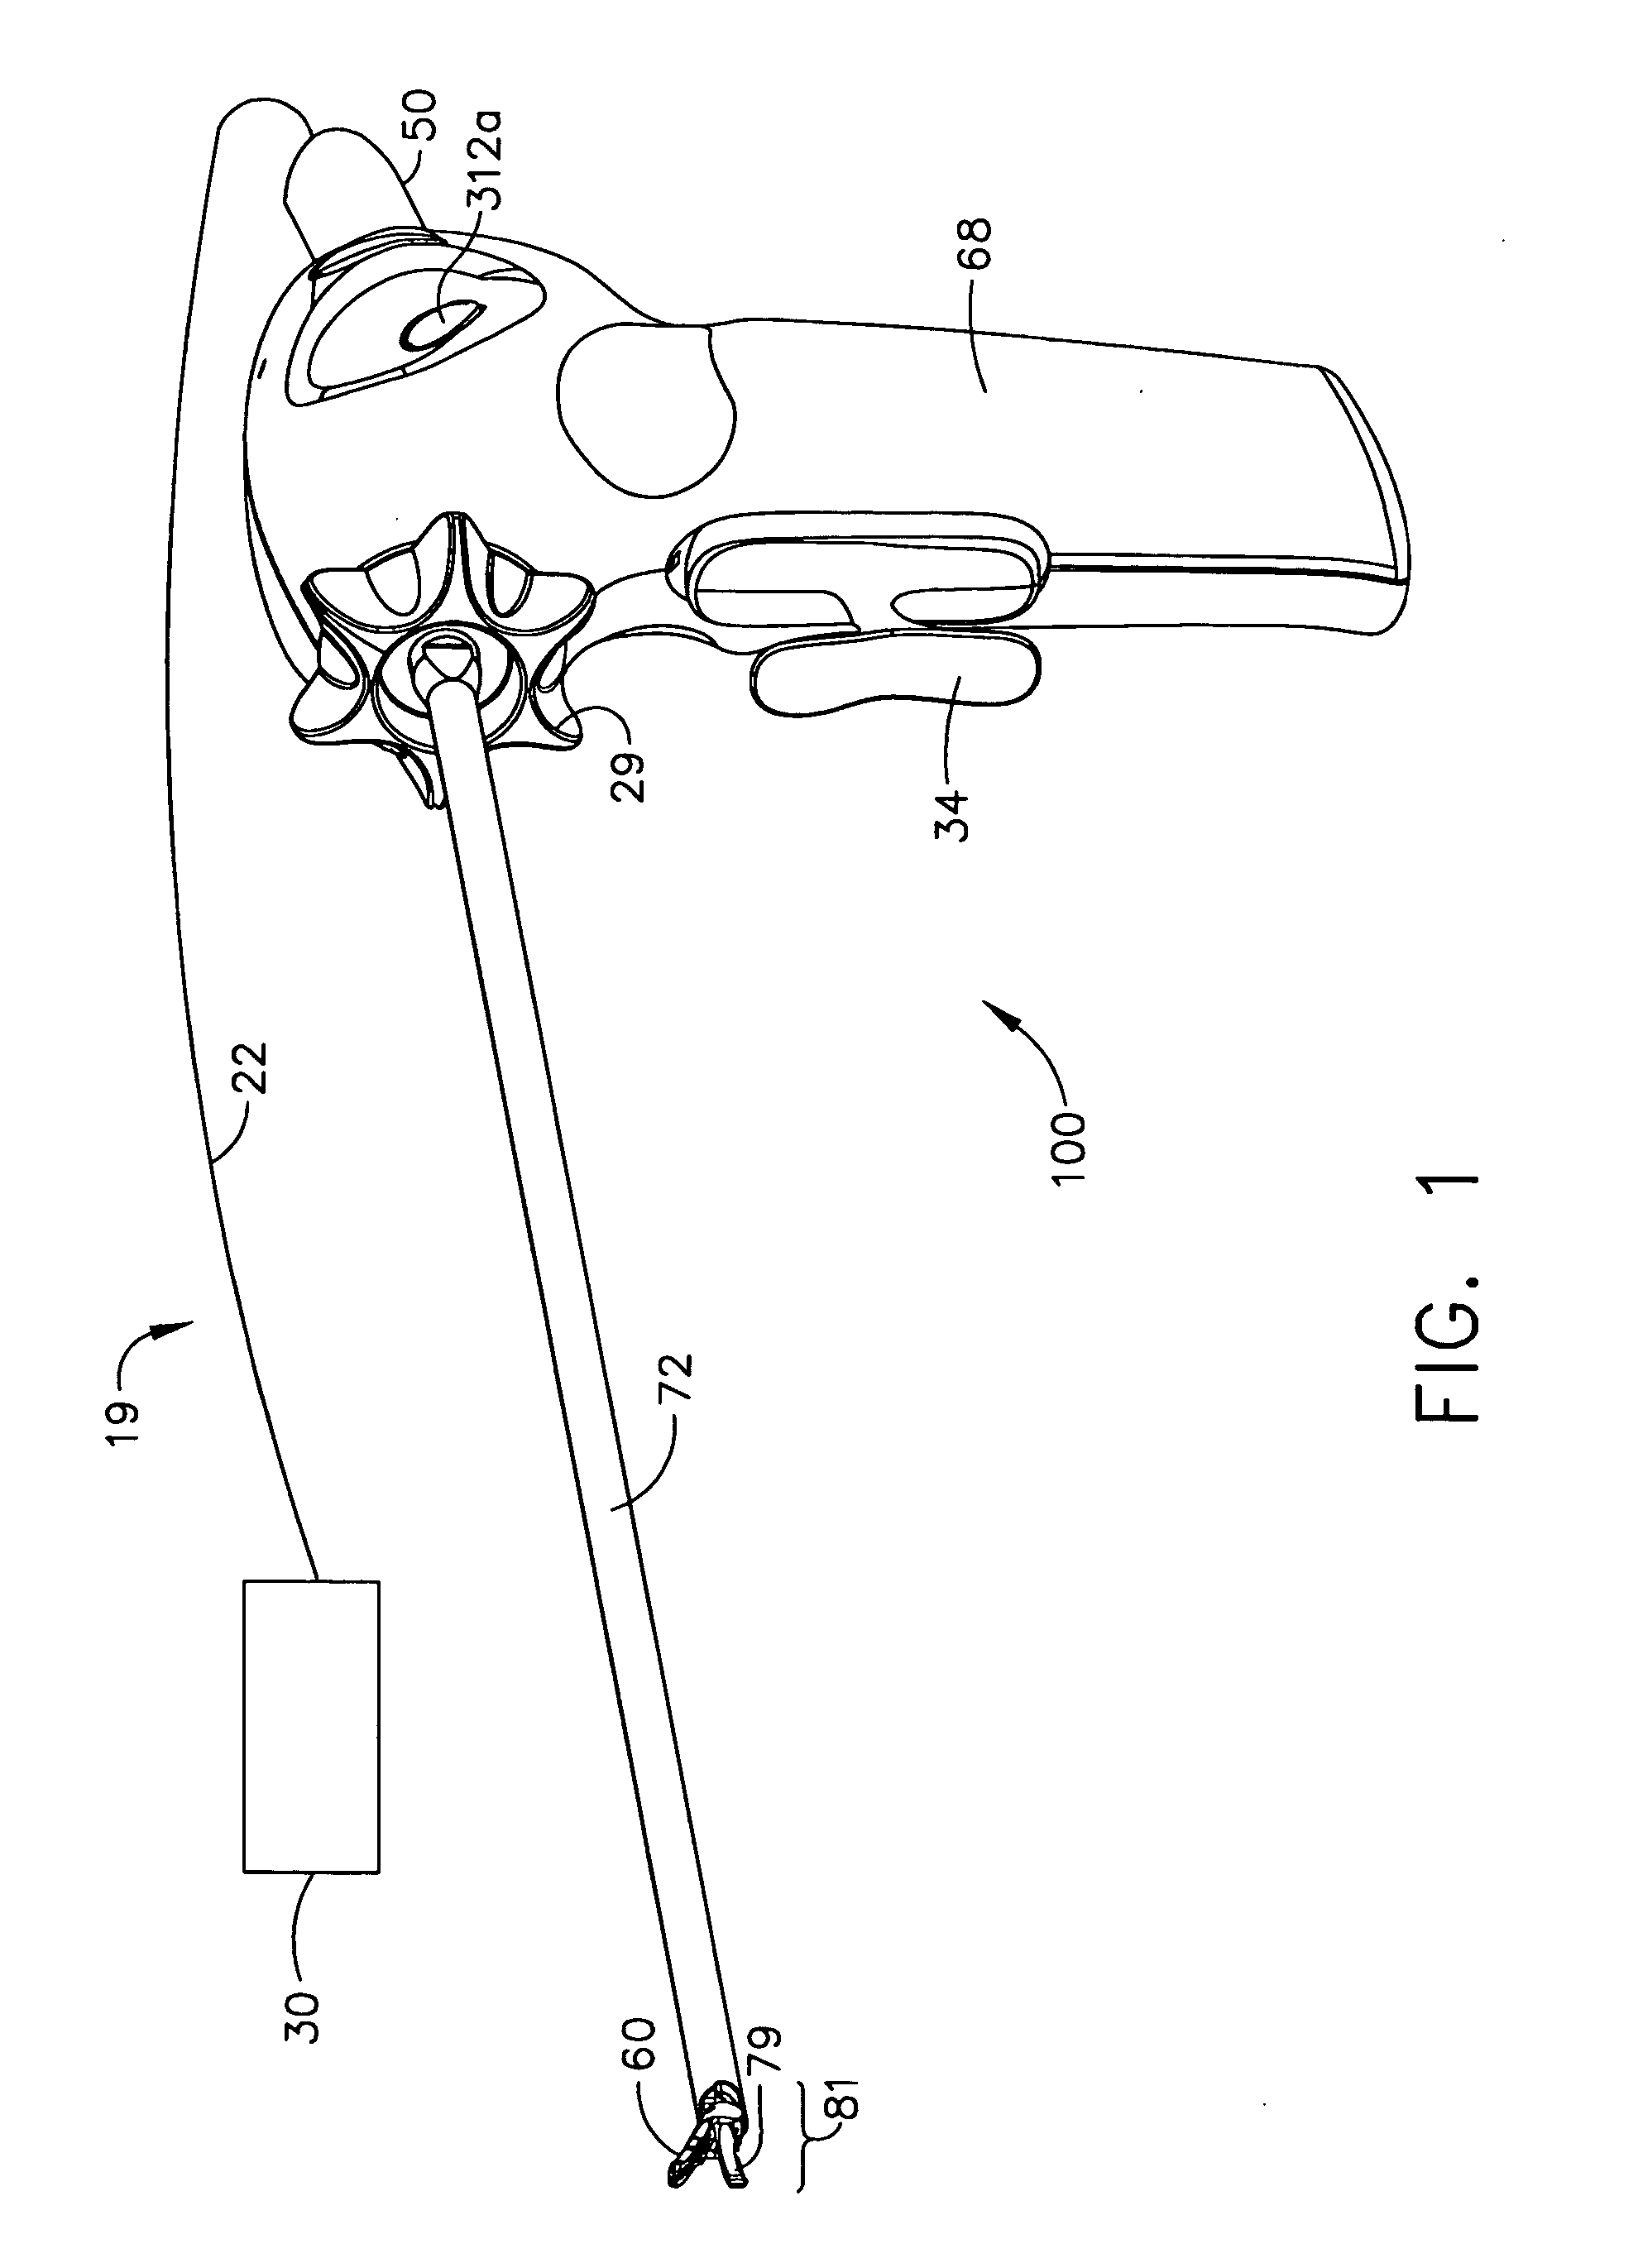 Clamp mechanism for use with an ultrasonic surgical instrument